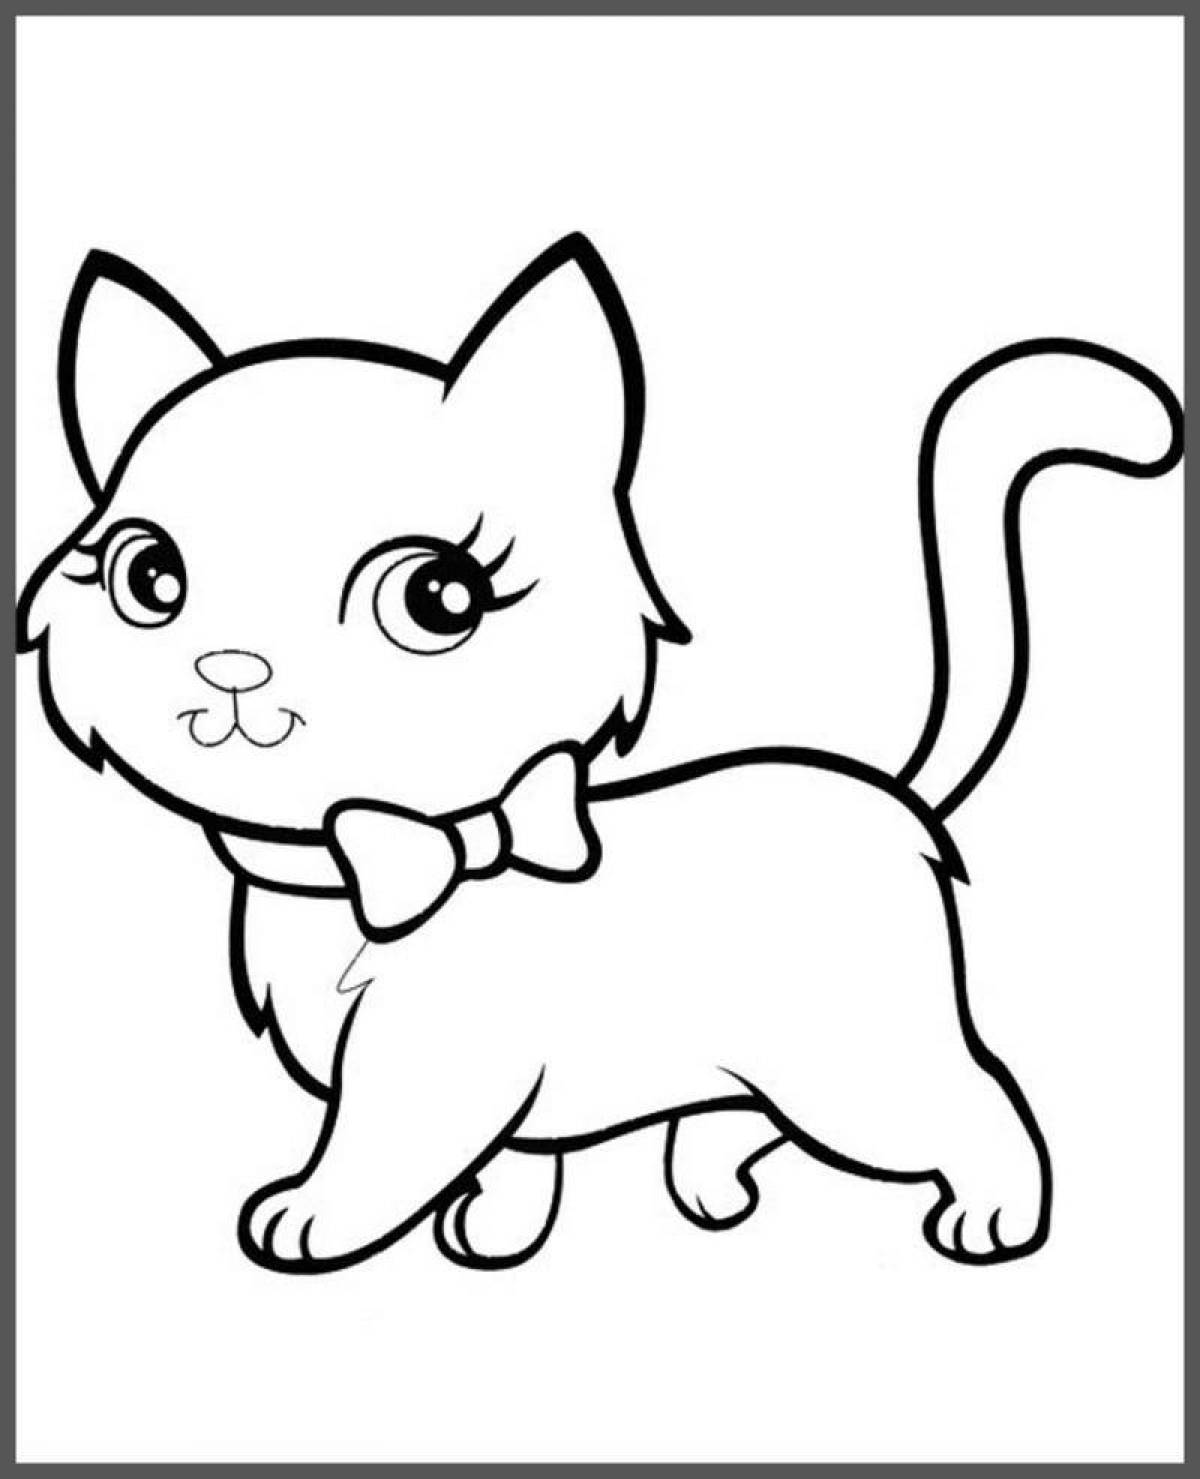 Majestic cat coloring easy